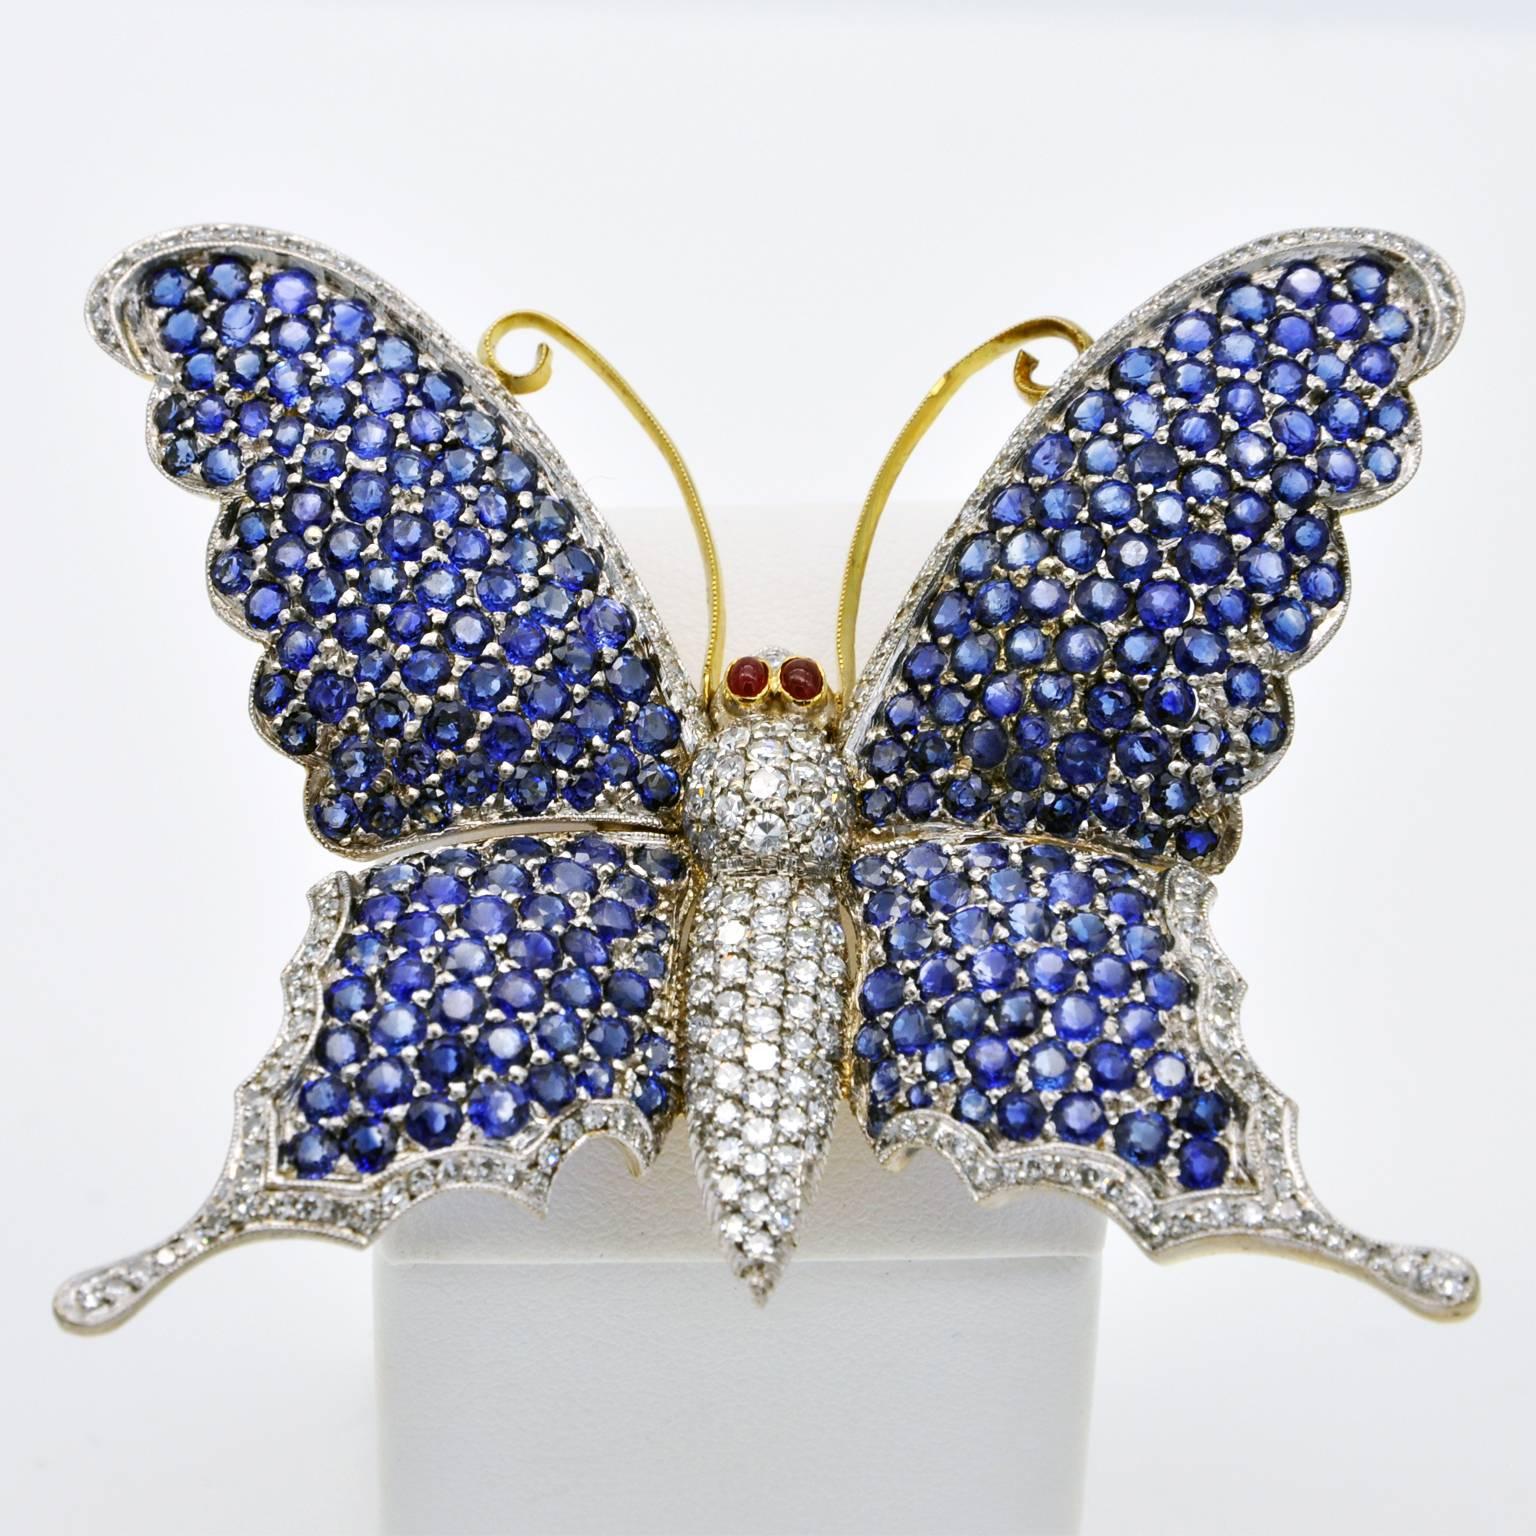 Unique large butterfly brooch 18K gold pavé set with Sri Lankan sapphires and brilliant cut diamonds.

Size 6.6cm (2.6 in) x 5.5 cm (2,16in)